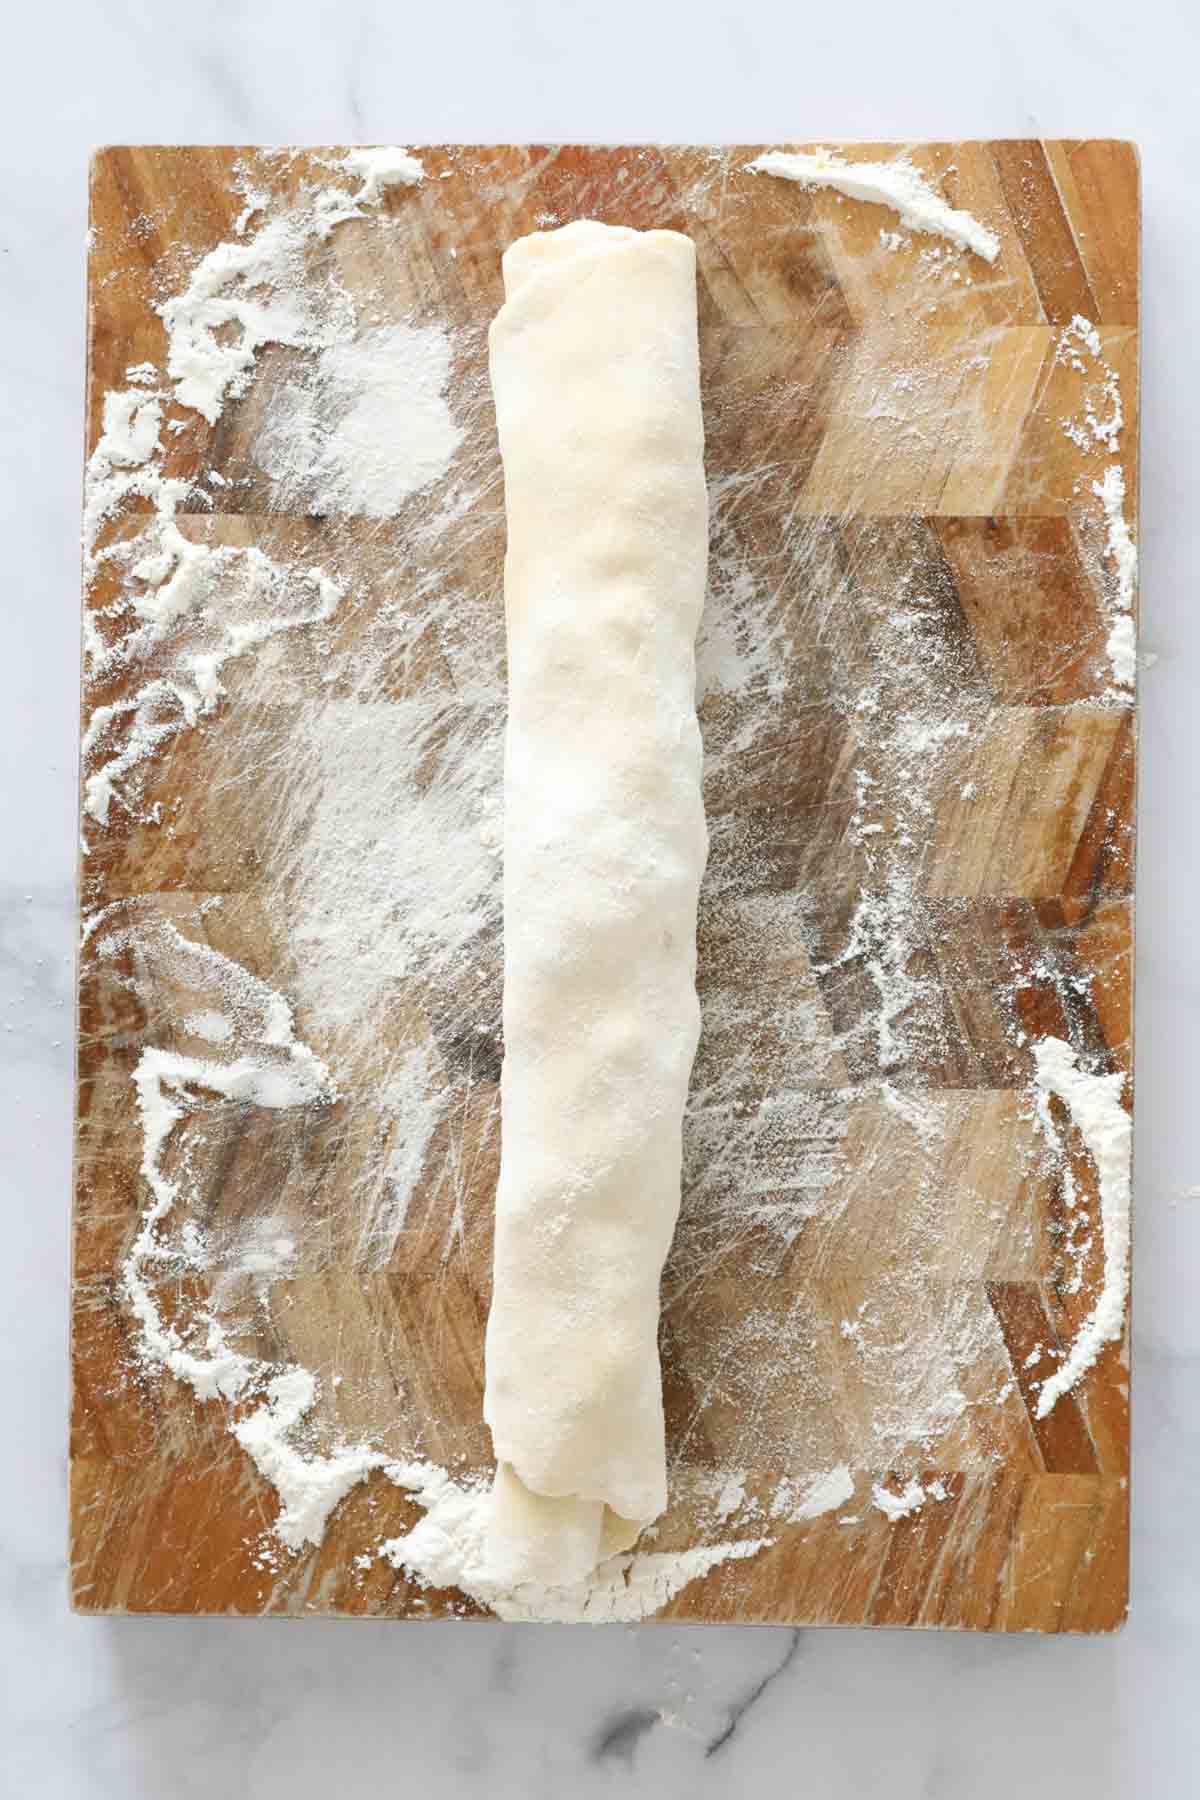 A dough rolled up into a tube.